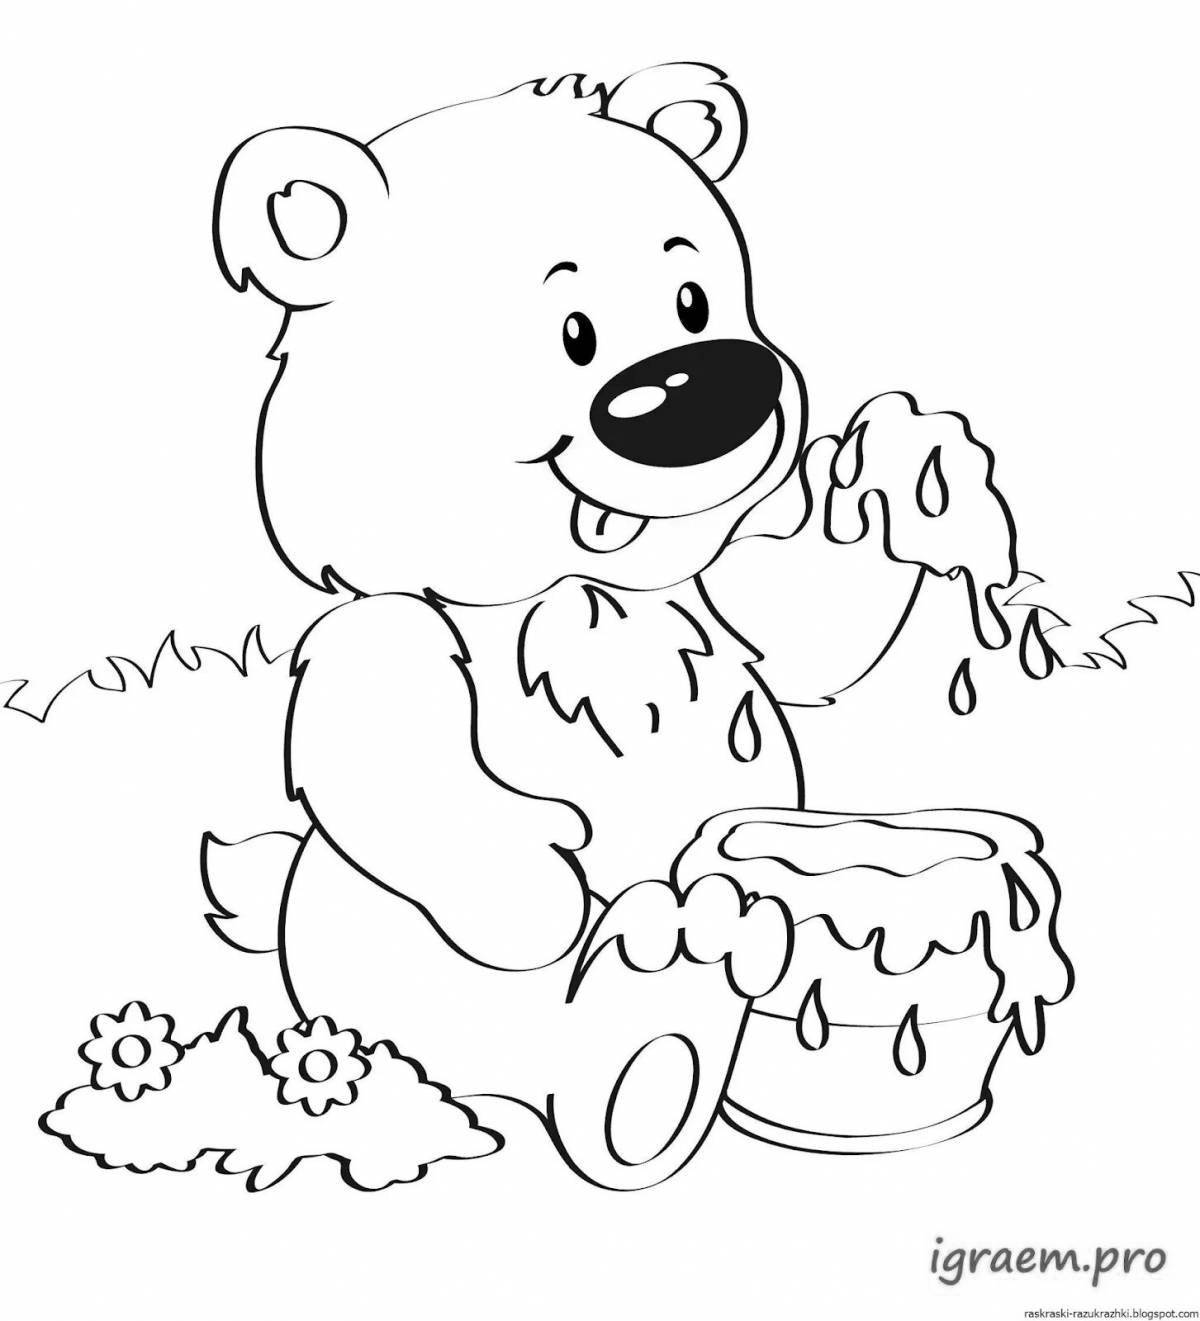 Drawing ayu coloring pages for kids